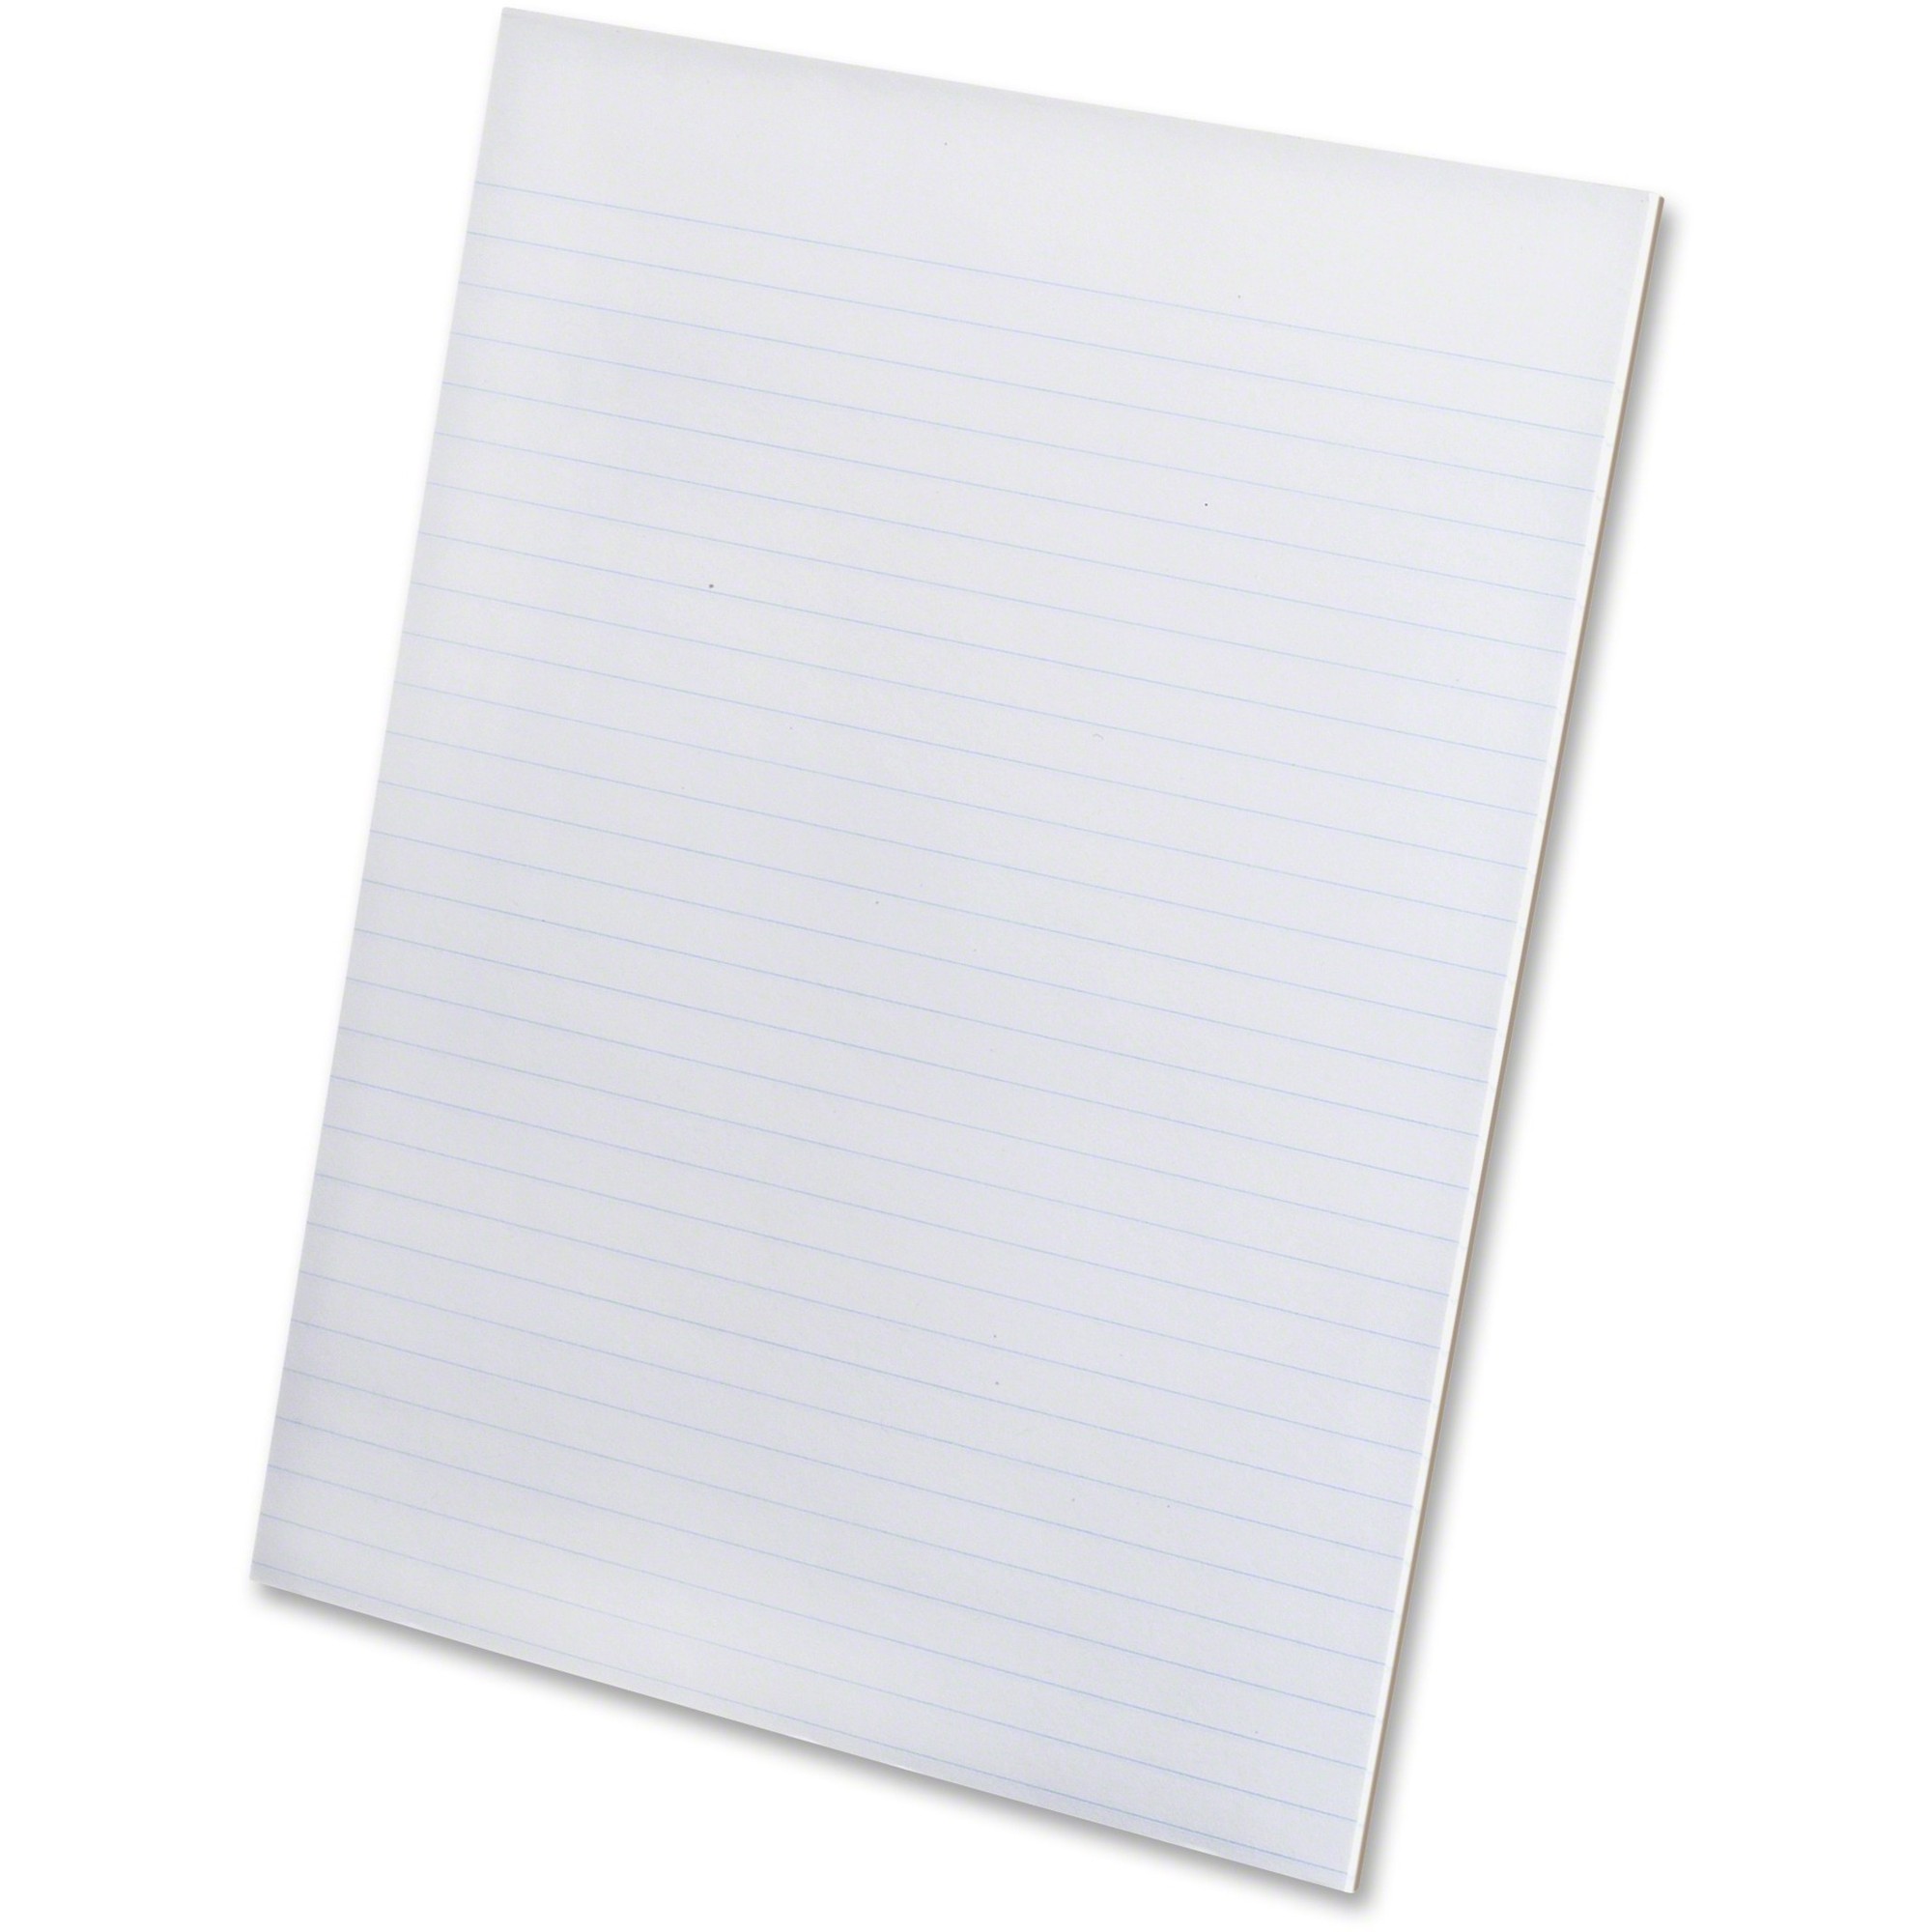 Ampad Glue Top Writing Pads - Letter - 50 Sheets - Glue - 15 lb Basis Weight - Letter - 8 1/2" x 11" - 11" x 8.5" x 0.2" - White